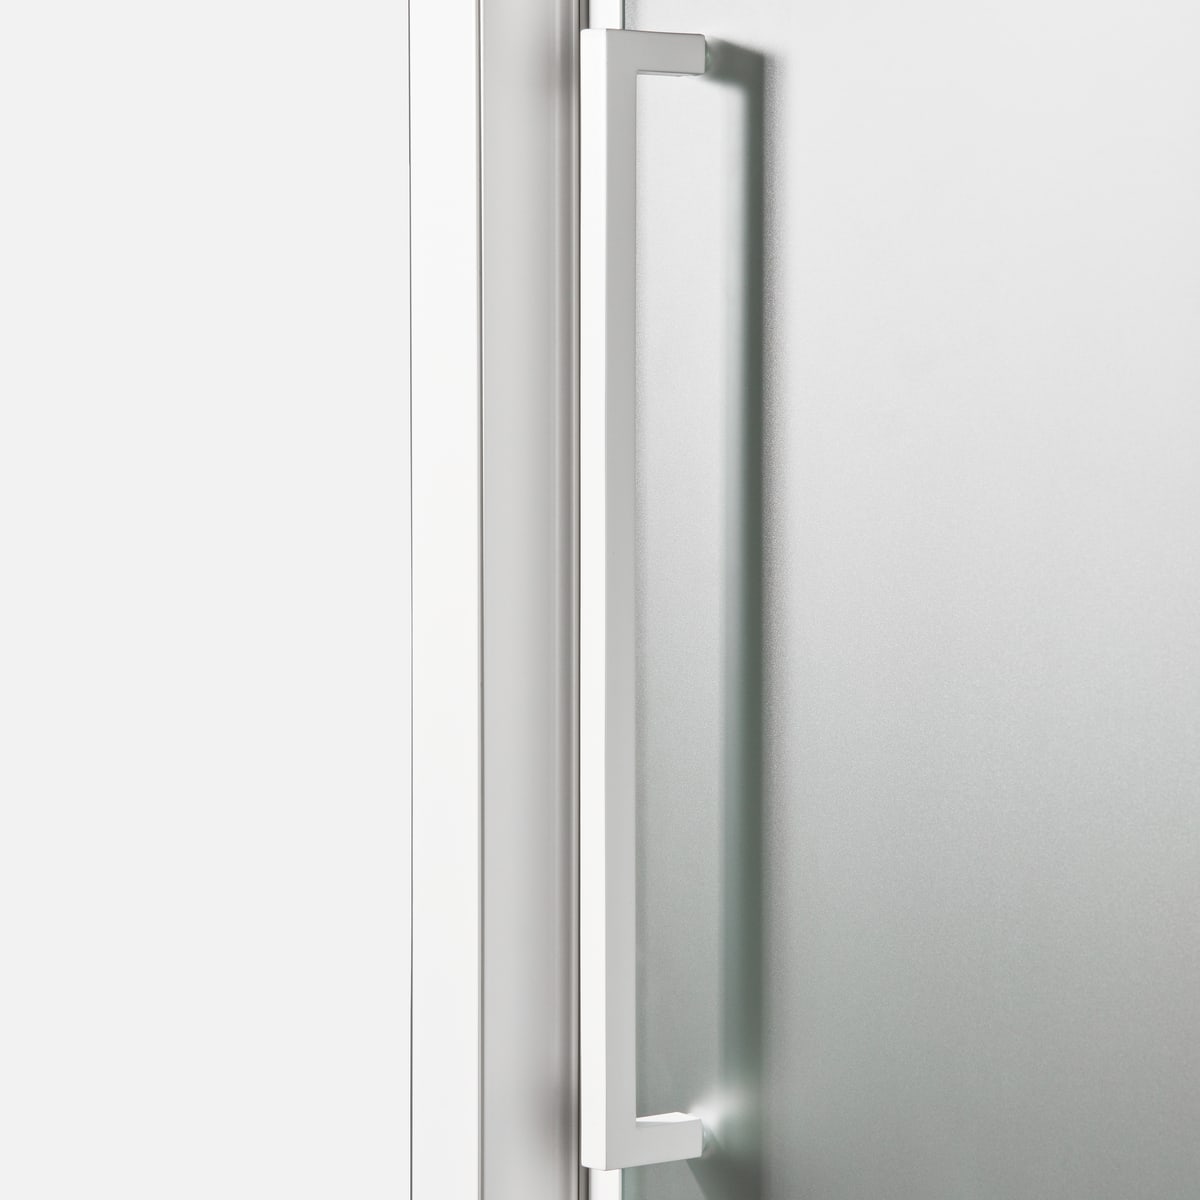 RECORD SALOON DOOR L 72-76 H 195 CM CLEAR GLASS 6 MM WHITE